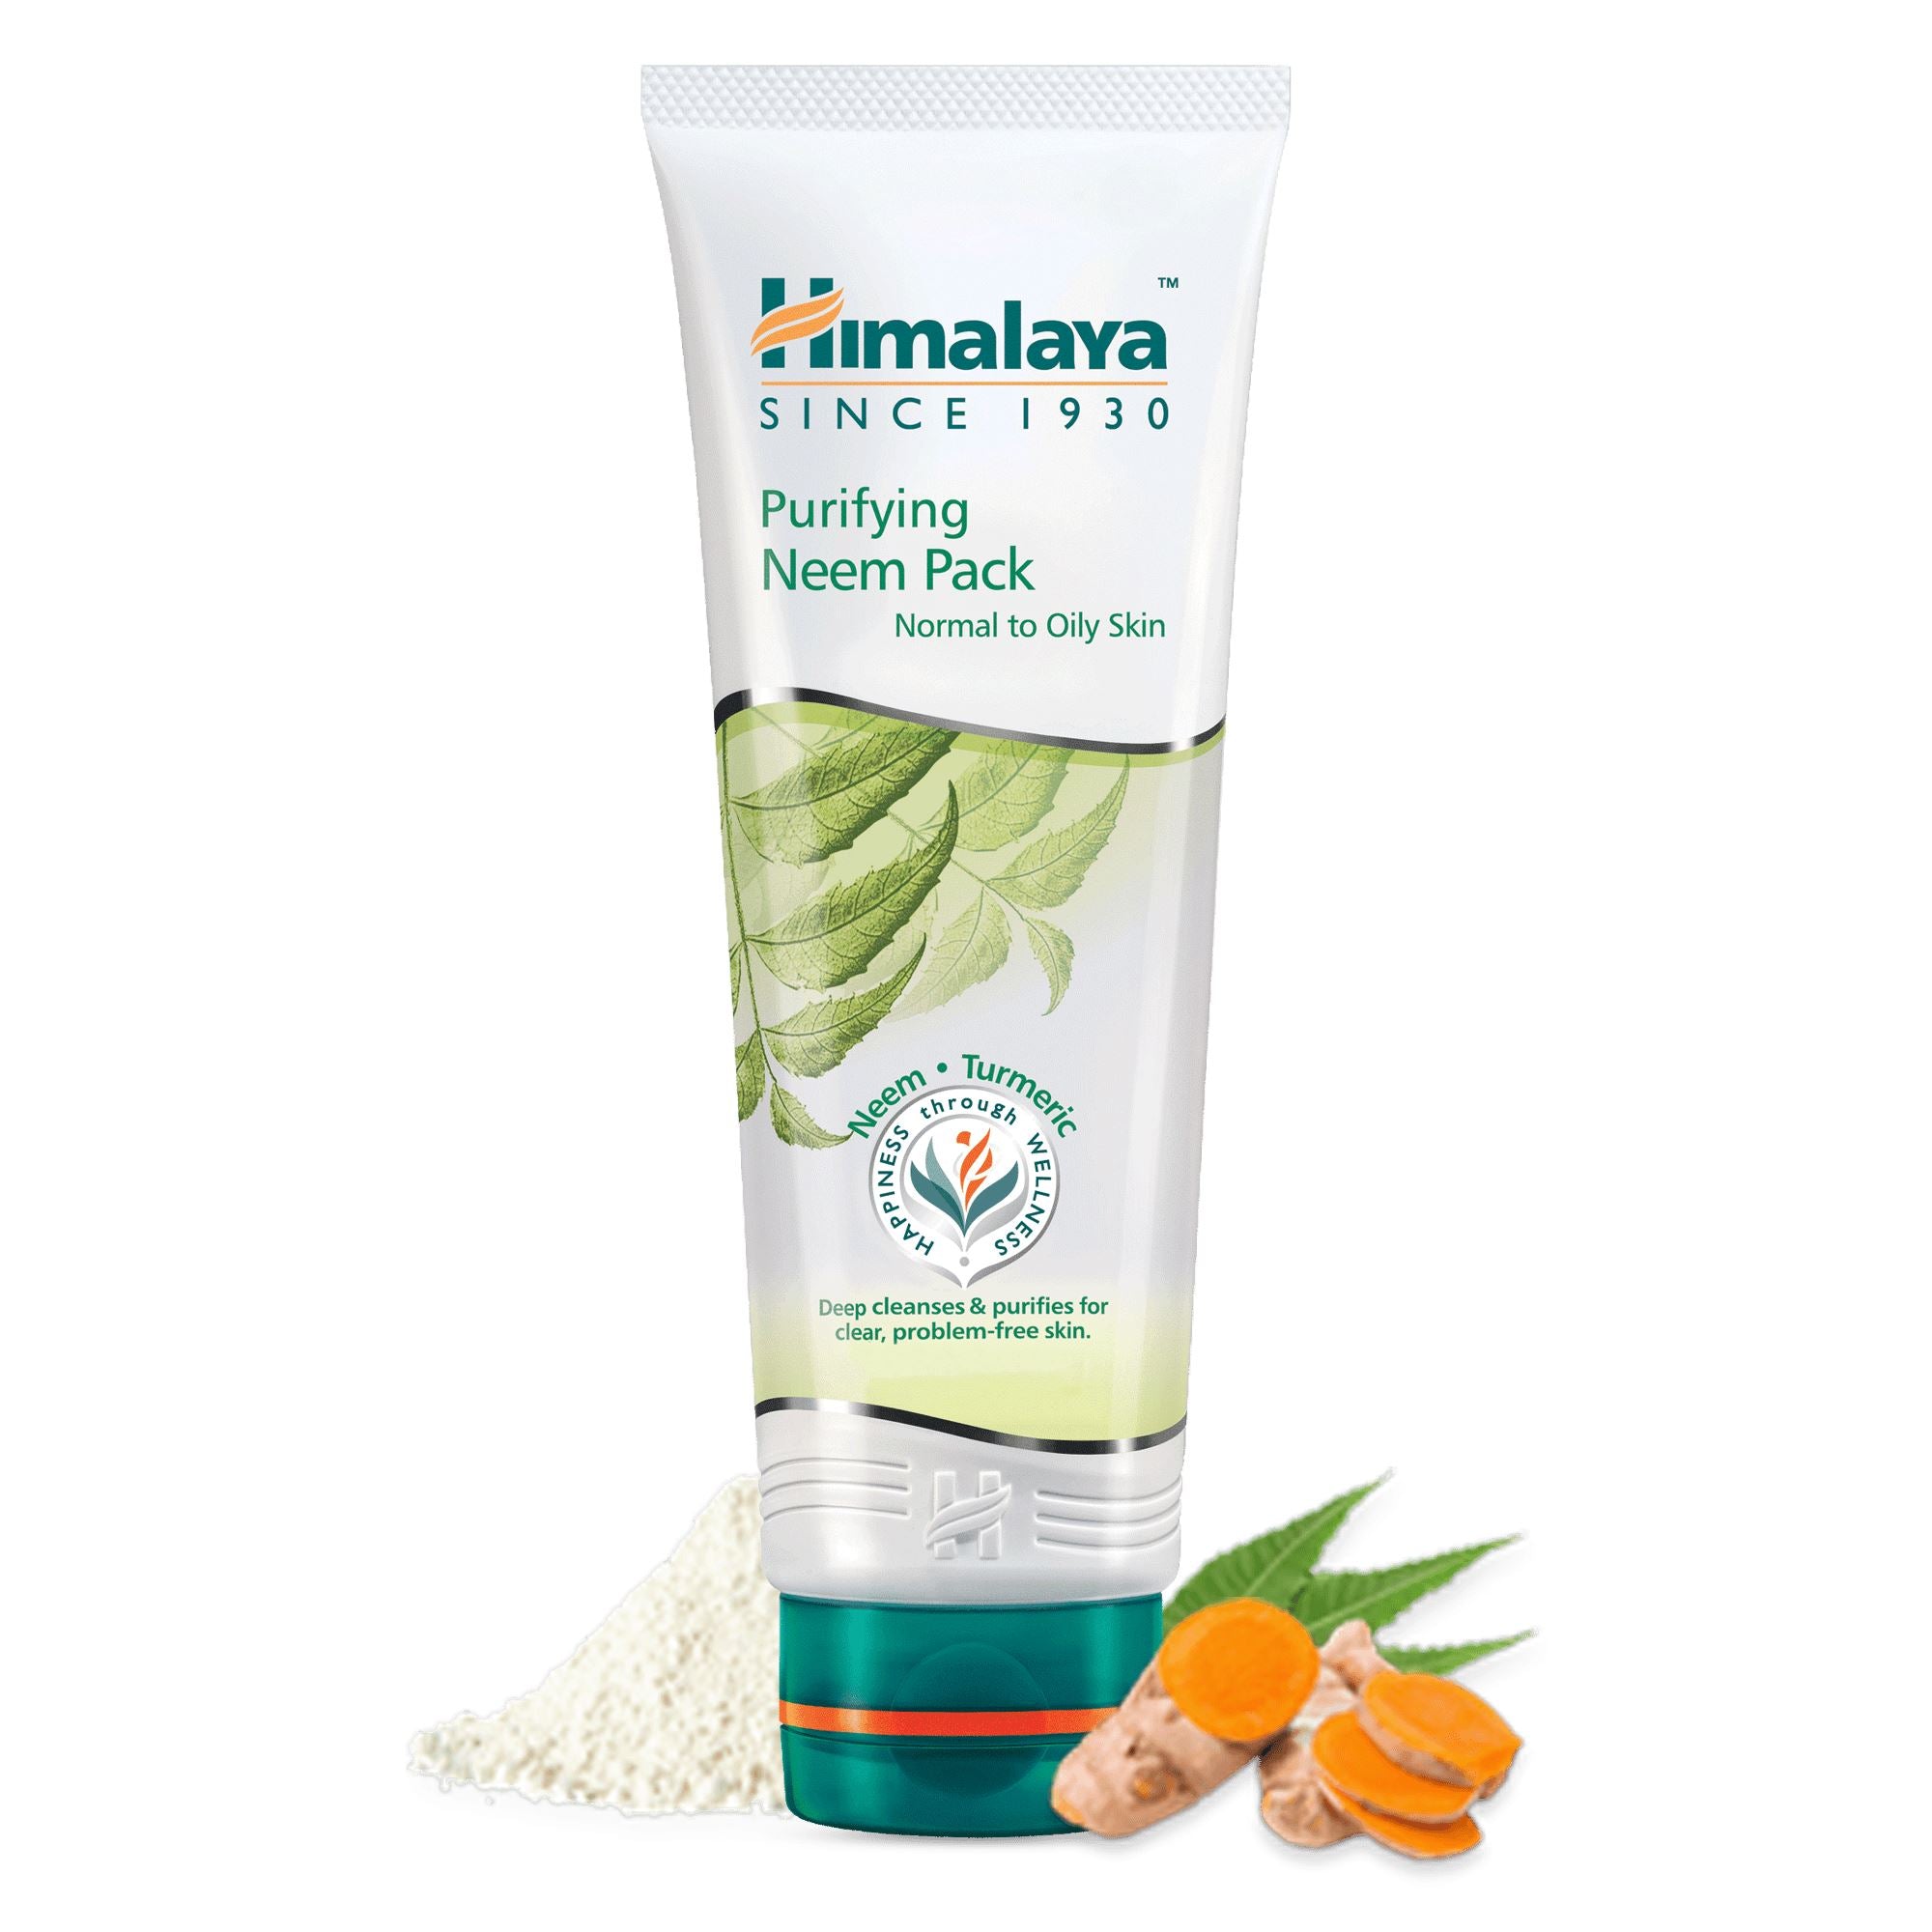 Himalaya Purifying Neem Face Pack 50g - Deep cleanses & purifies for clear, problem-free skin